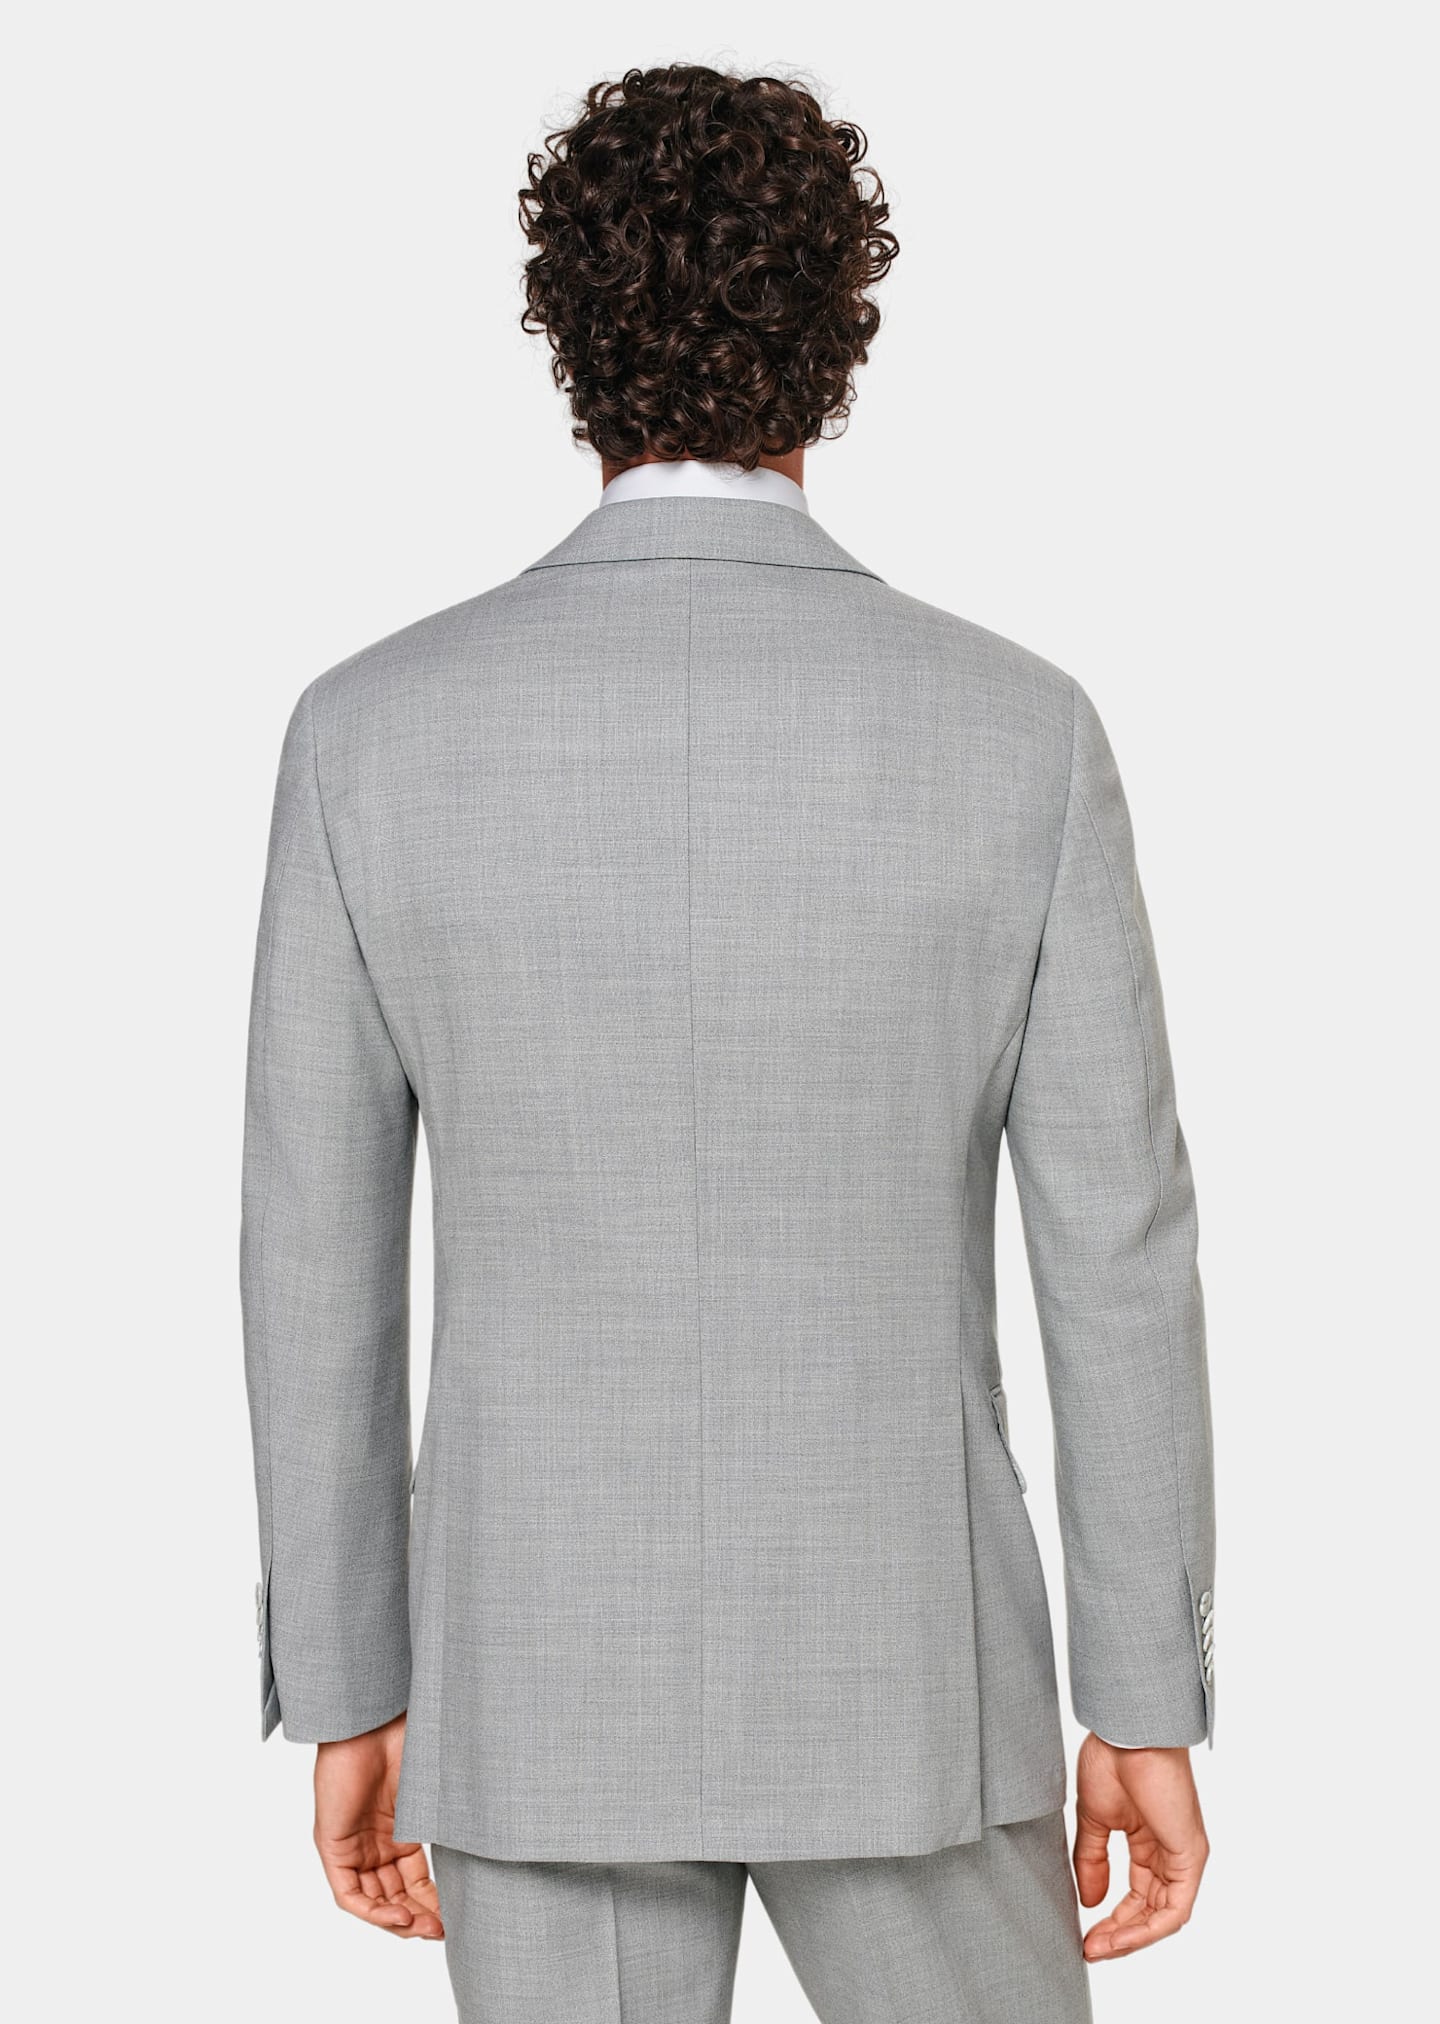 Rear view of grey relaxed fit suit